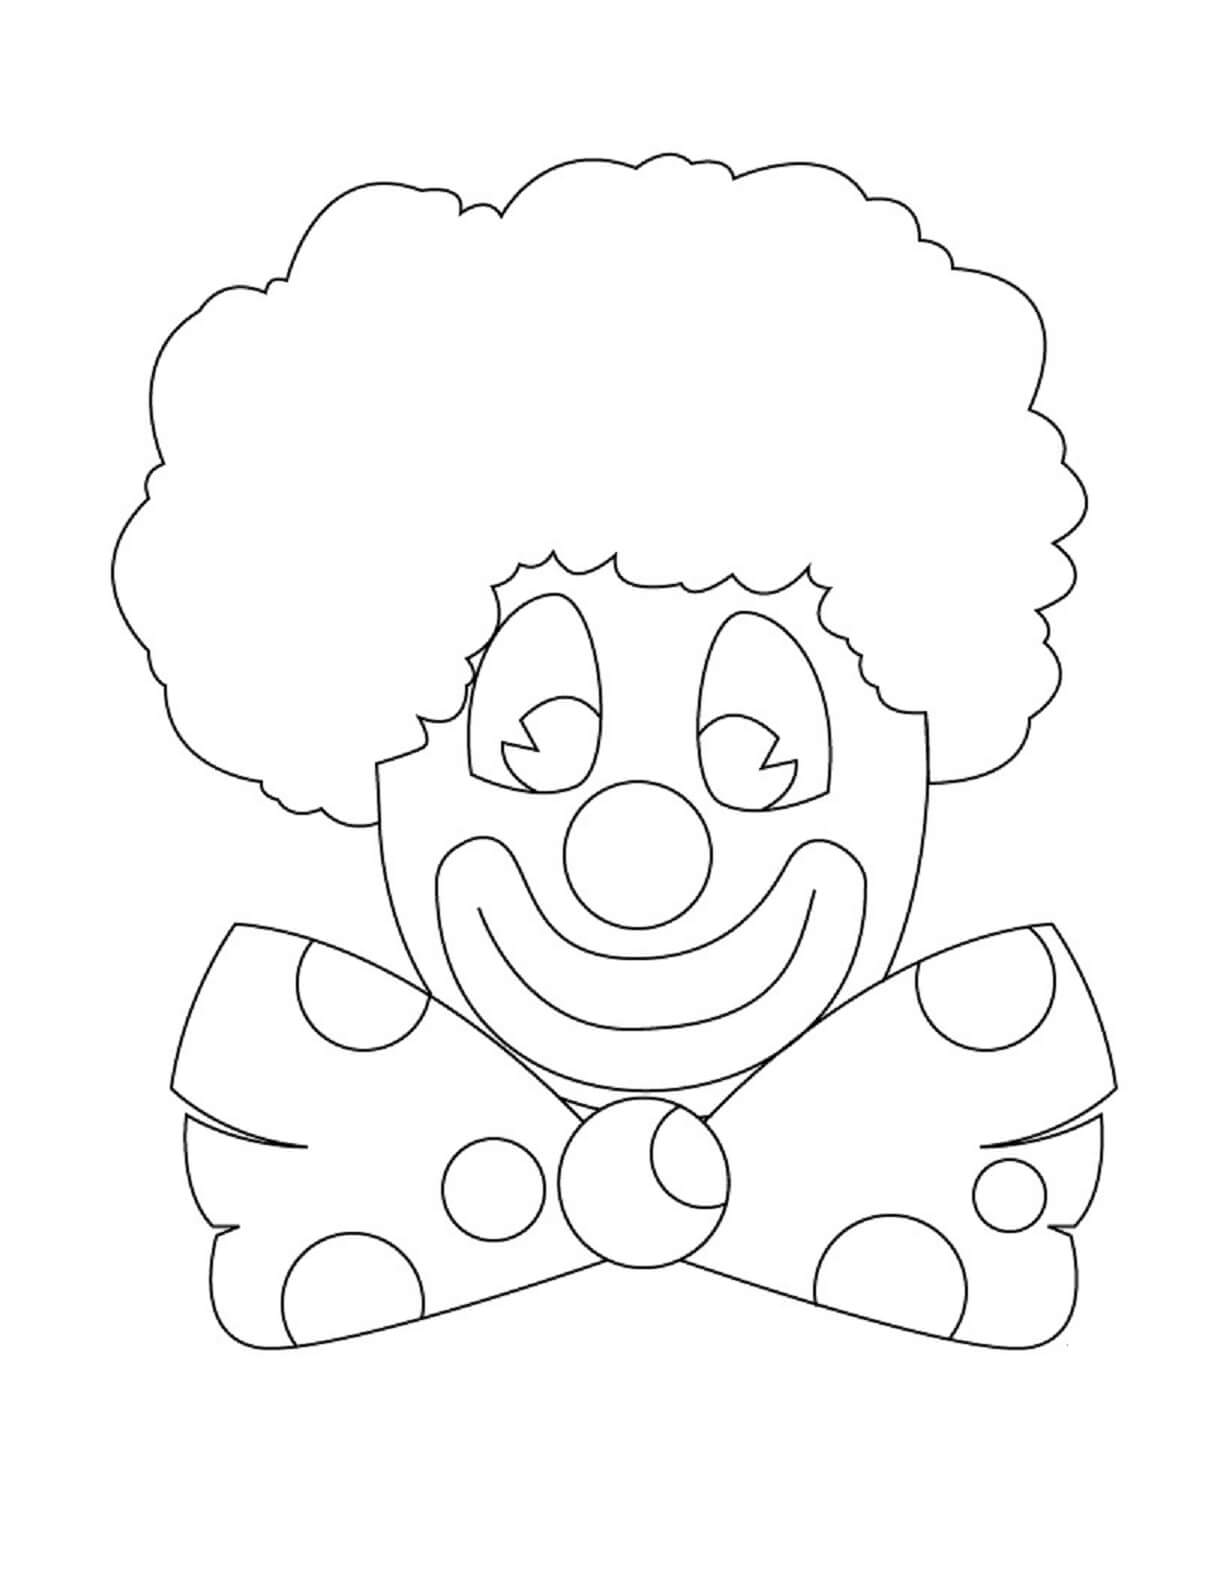 Basic clown face coloring page